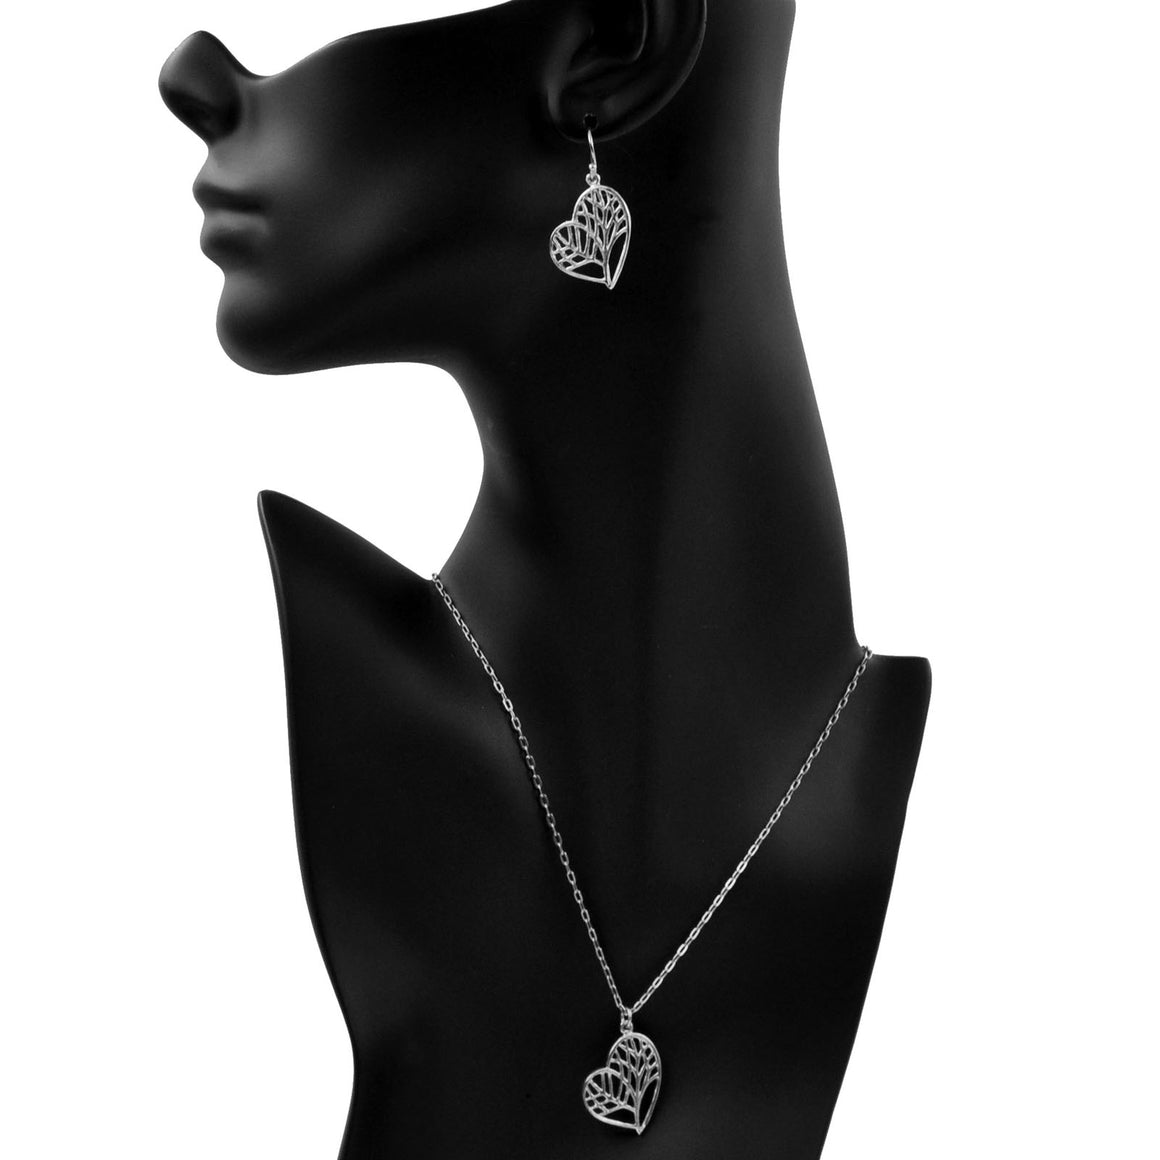 Tree of Life Heart Necklace - Platinum Silver